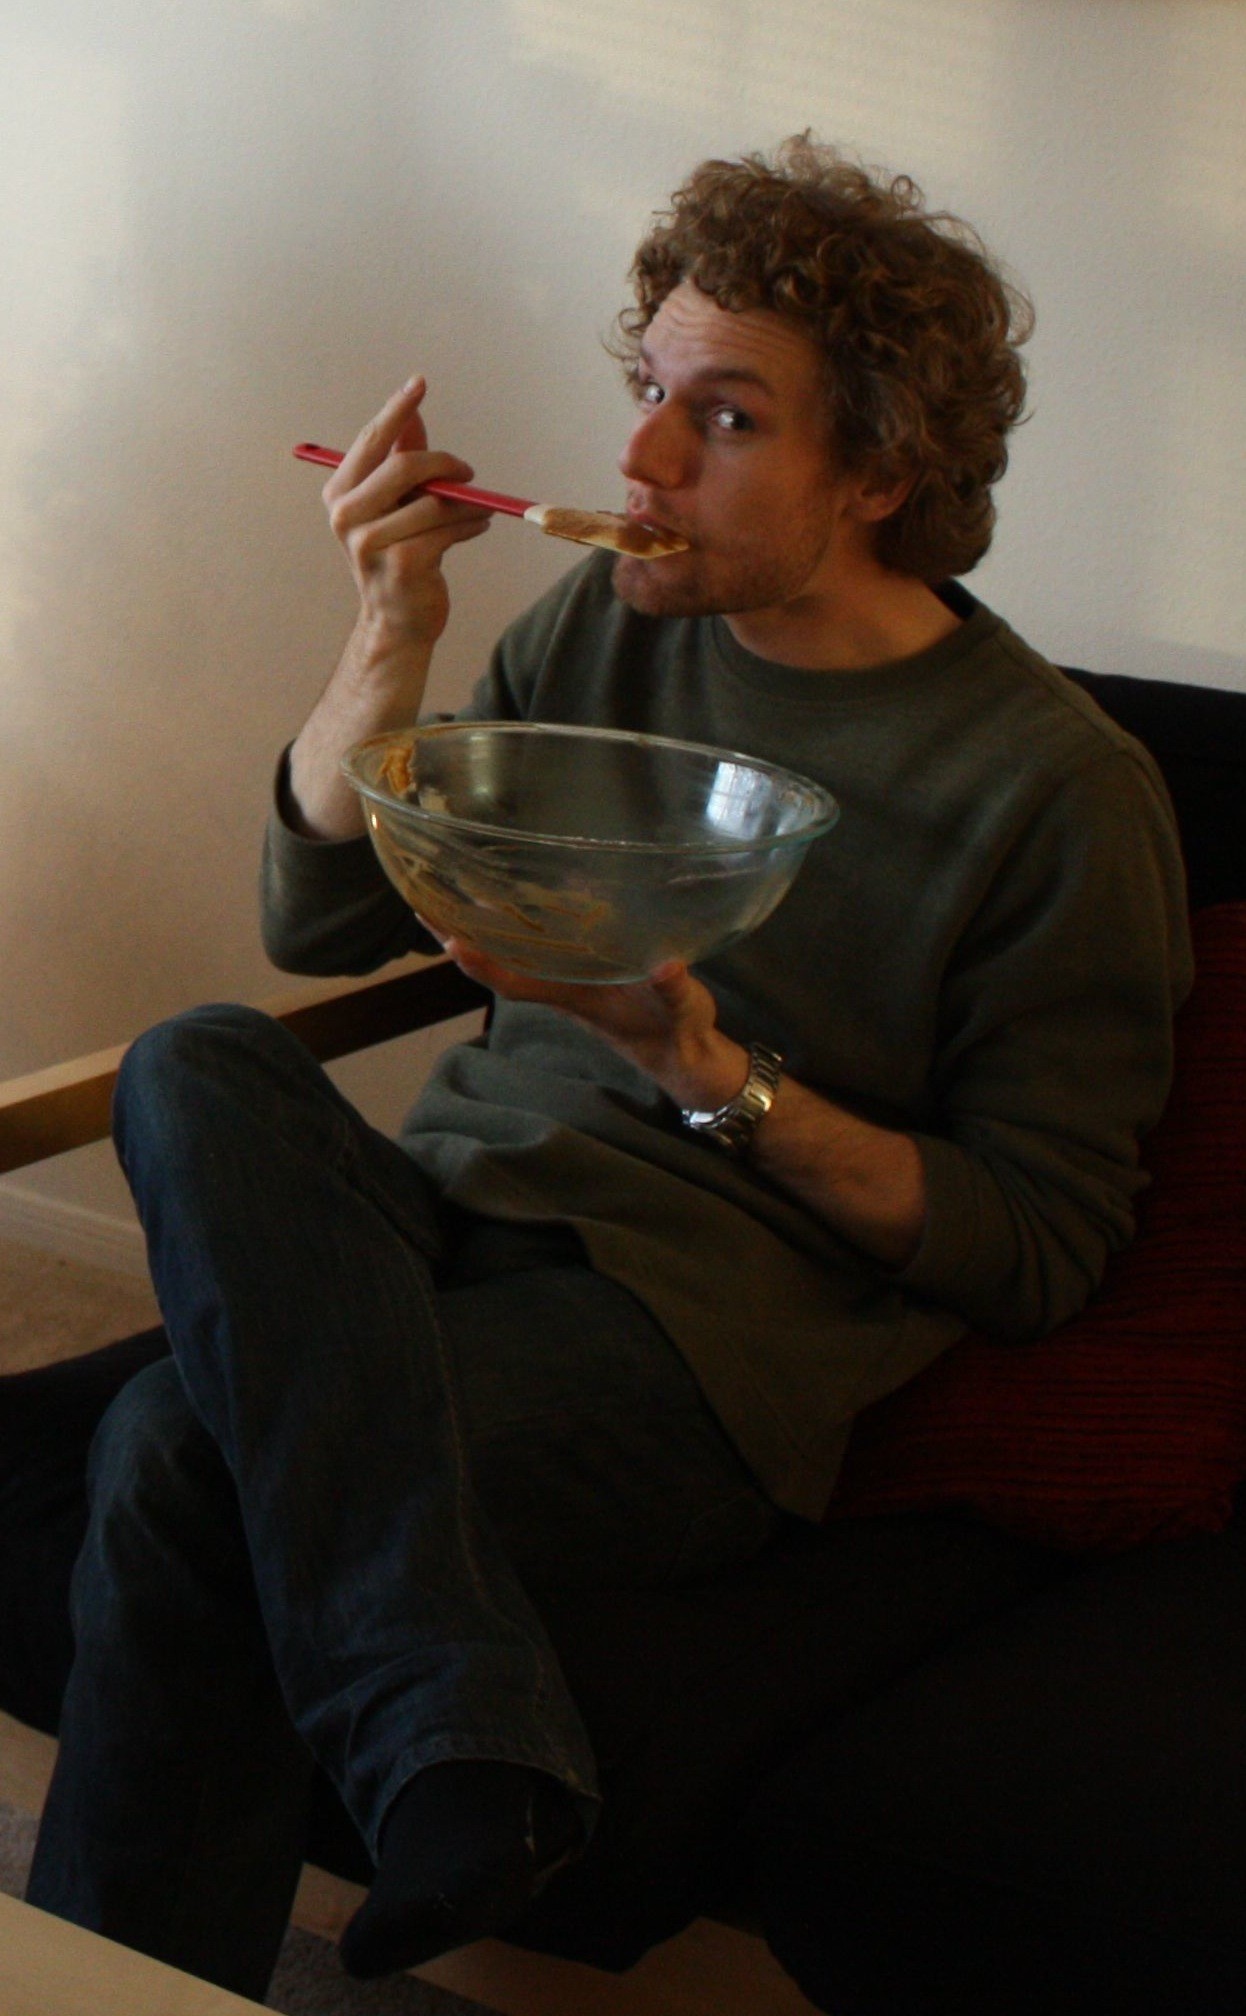 Big Mr. eating batter from a mixing bowl